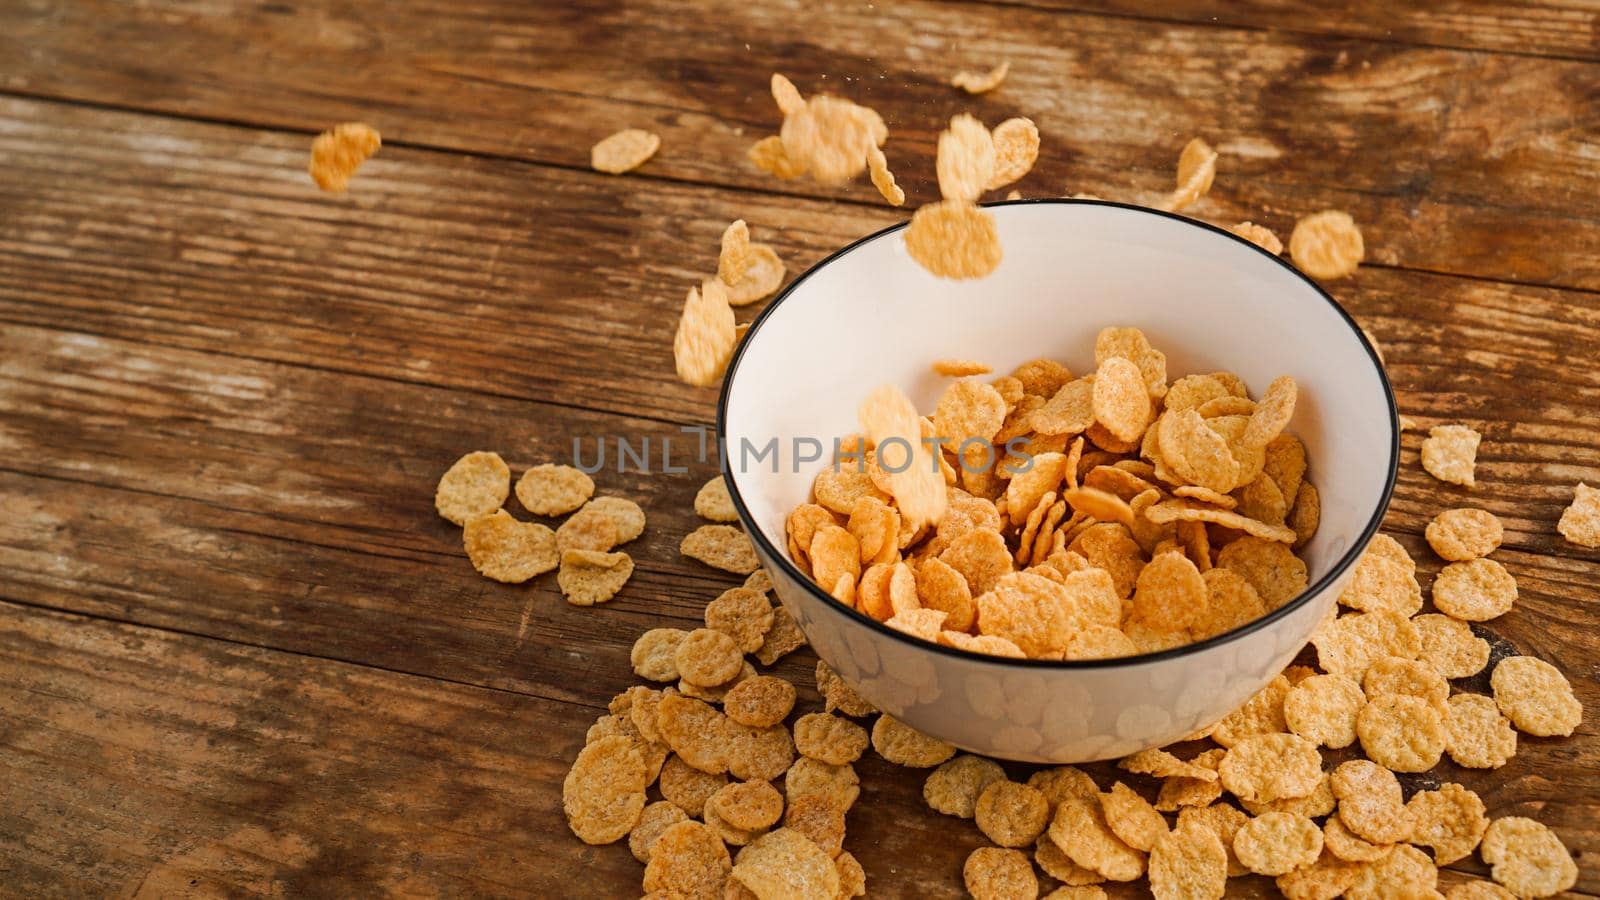 Cereals falling in a white bowl on a wooden table. Bright photo. Healthy quick breakfast